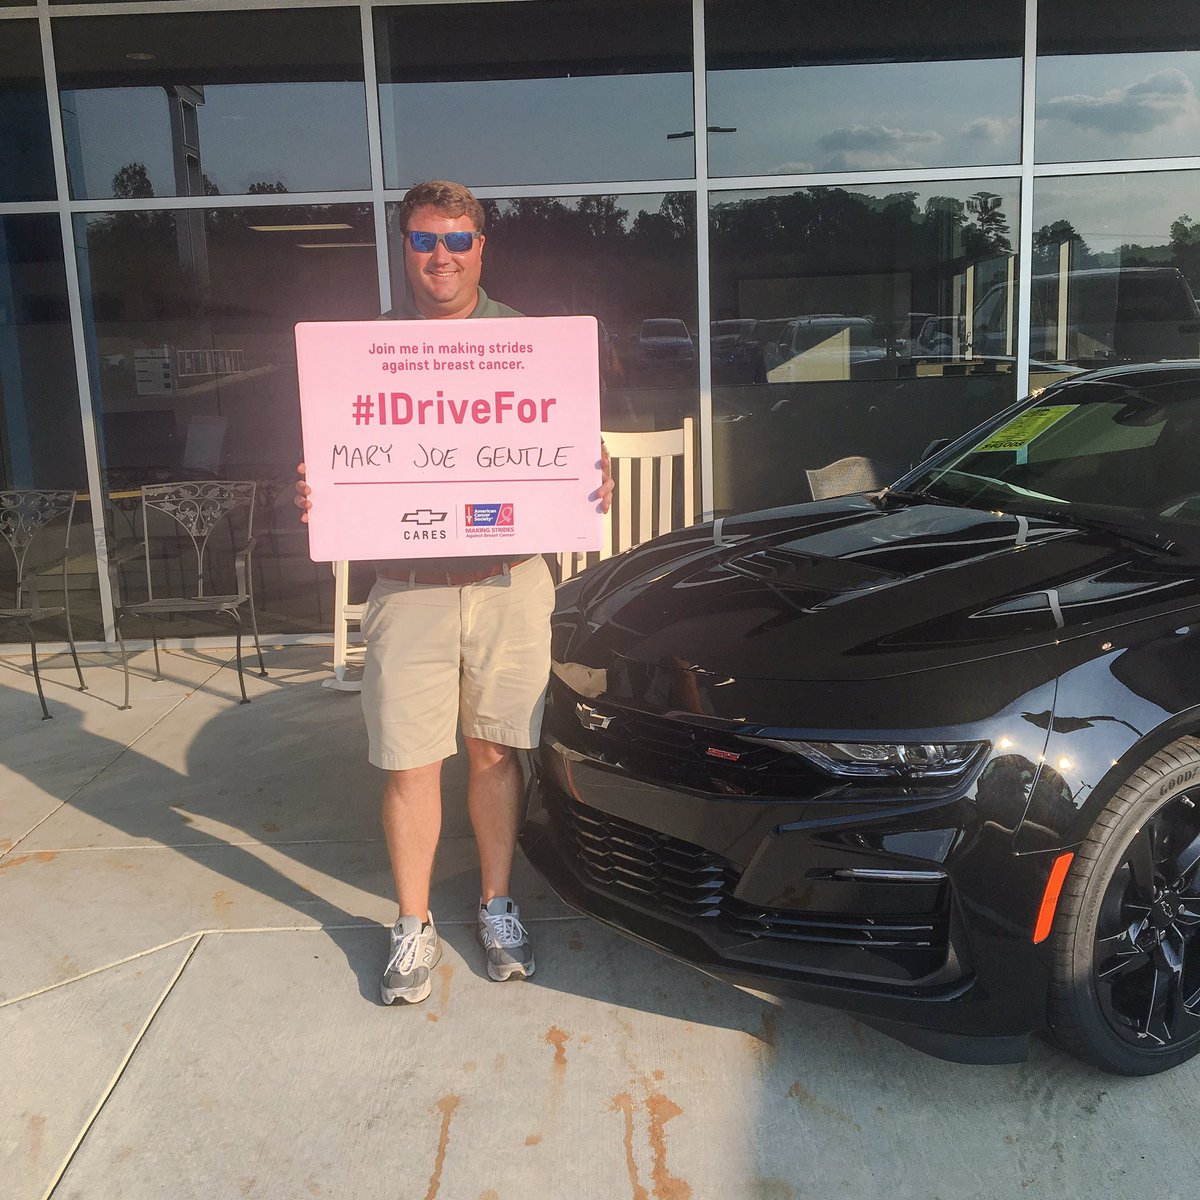 Harbin Automotive On Twitter We Re Motivated This Monday To Support Breast Cancer Awareness And Research Through Chevrolet S Idrivefor Campaign Thank You Lee For Helping Spread The Word Chevrolet Americancancer Https T Co Hifoulshos